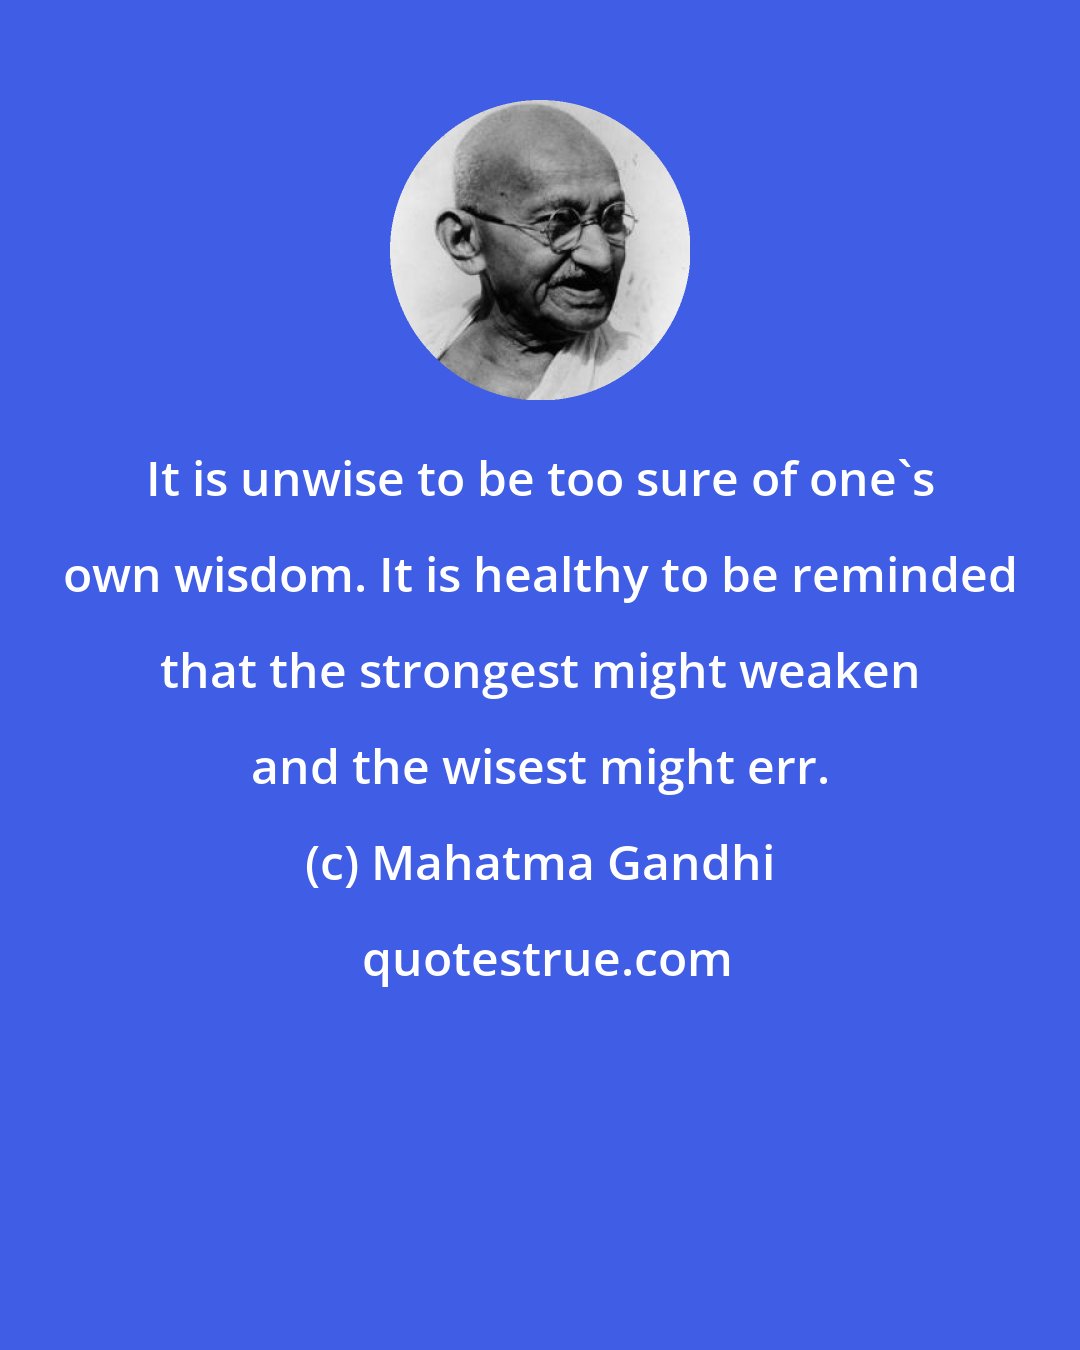 Mahatma Gandhi: It is unwise to be too sure of one's own wisdom. It is healthy to be reminded that the strongest might weaken and the wisest might err.